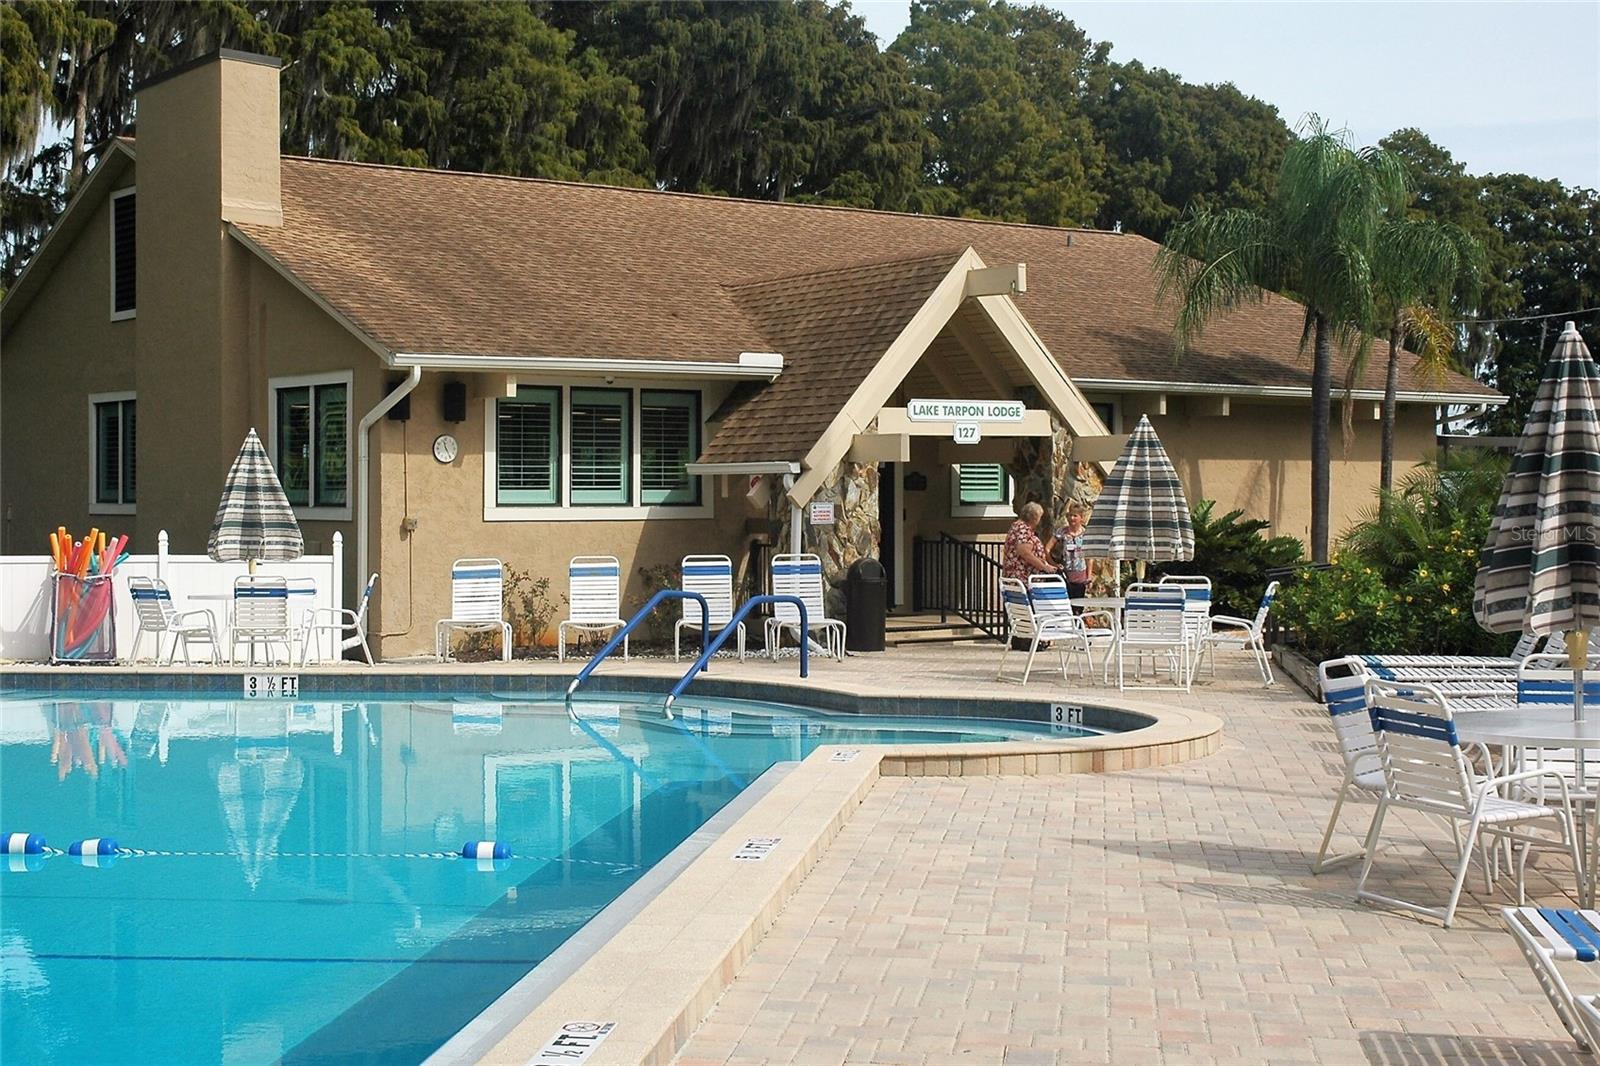 The Lodge pool, ping pong, grills and a full kitchen at your disposal!